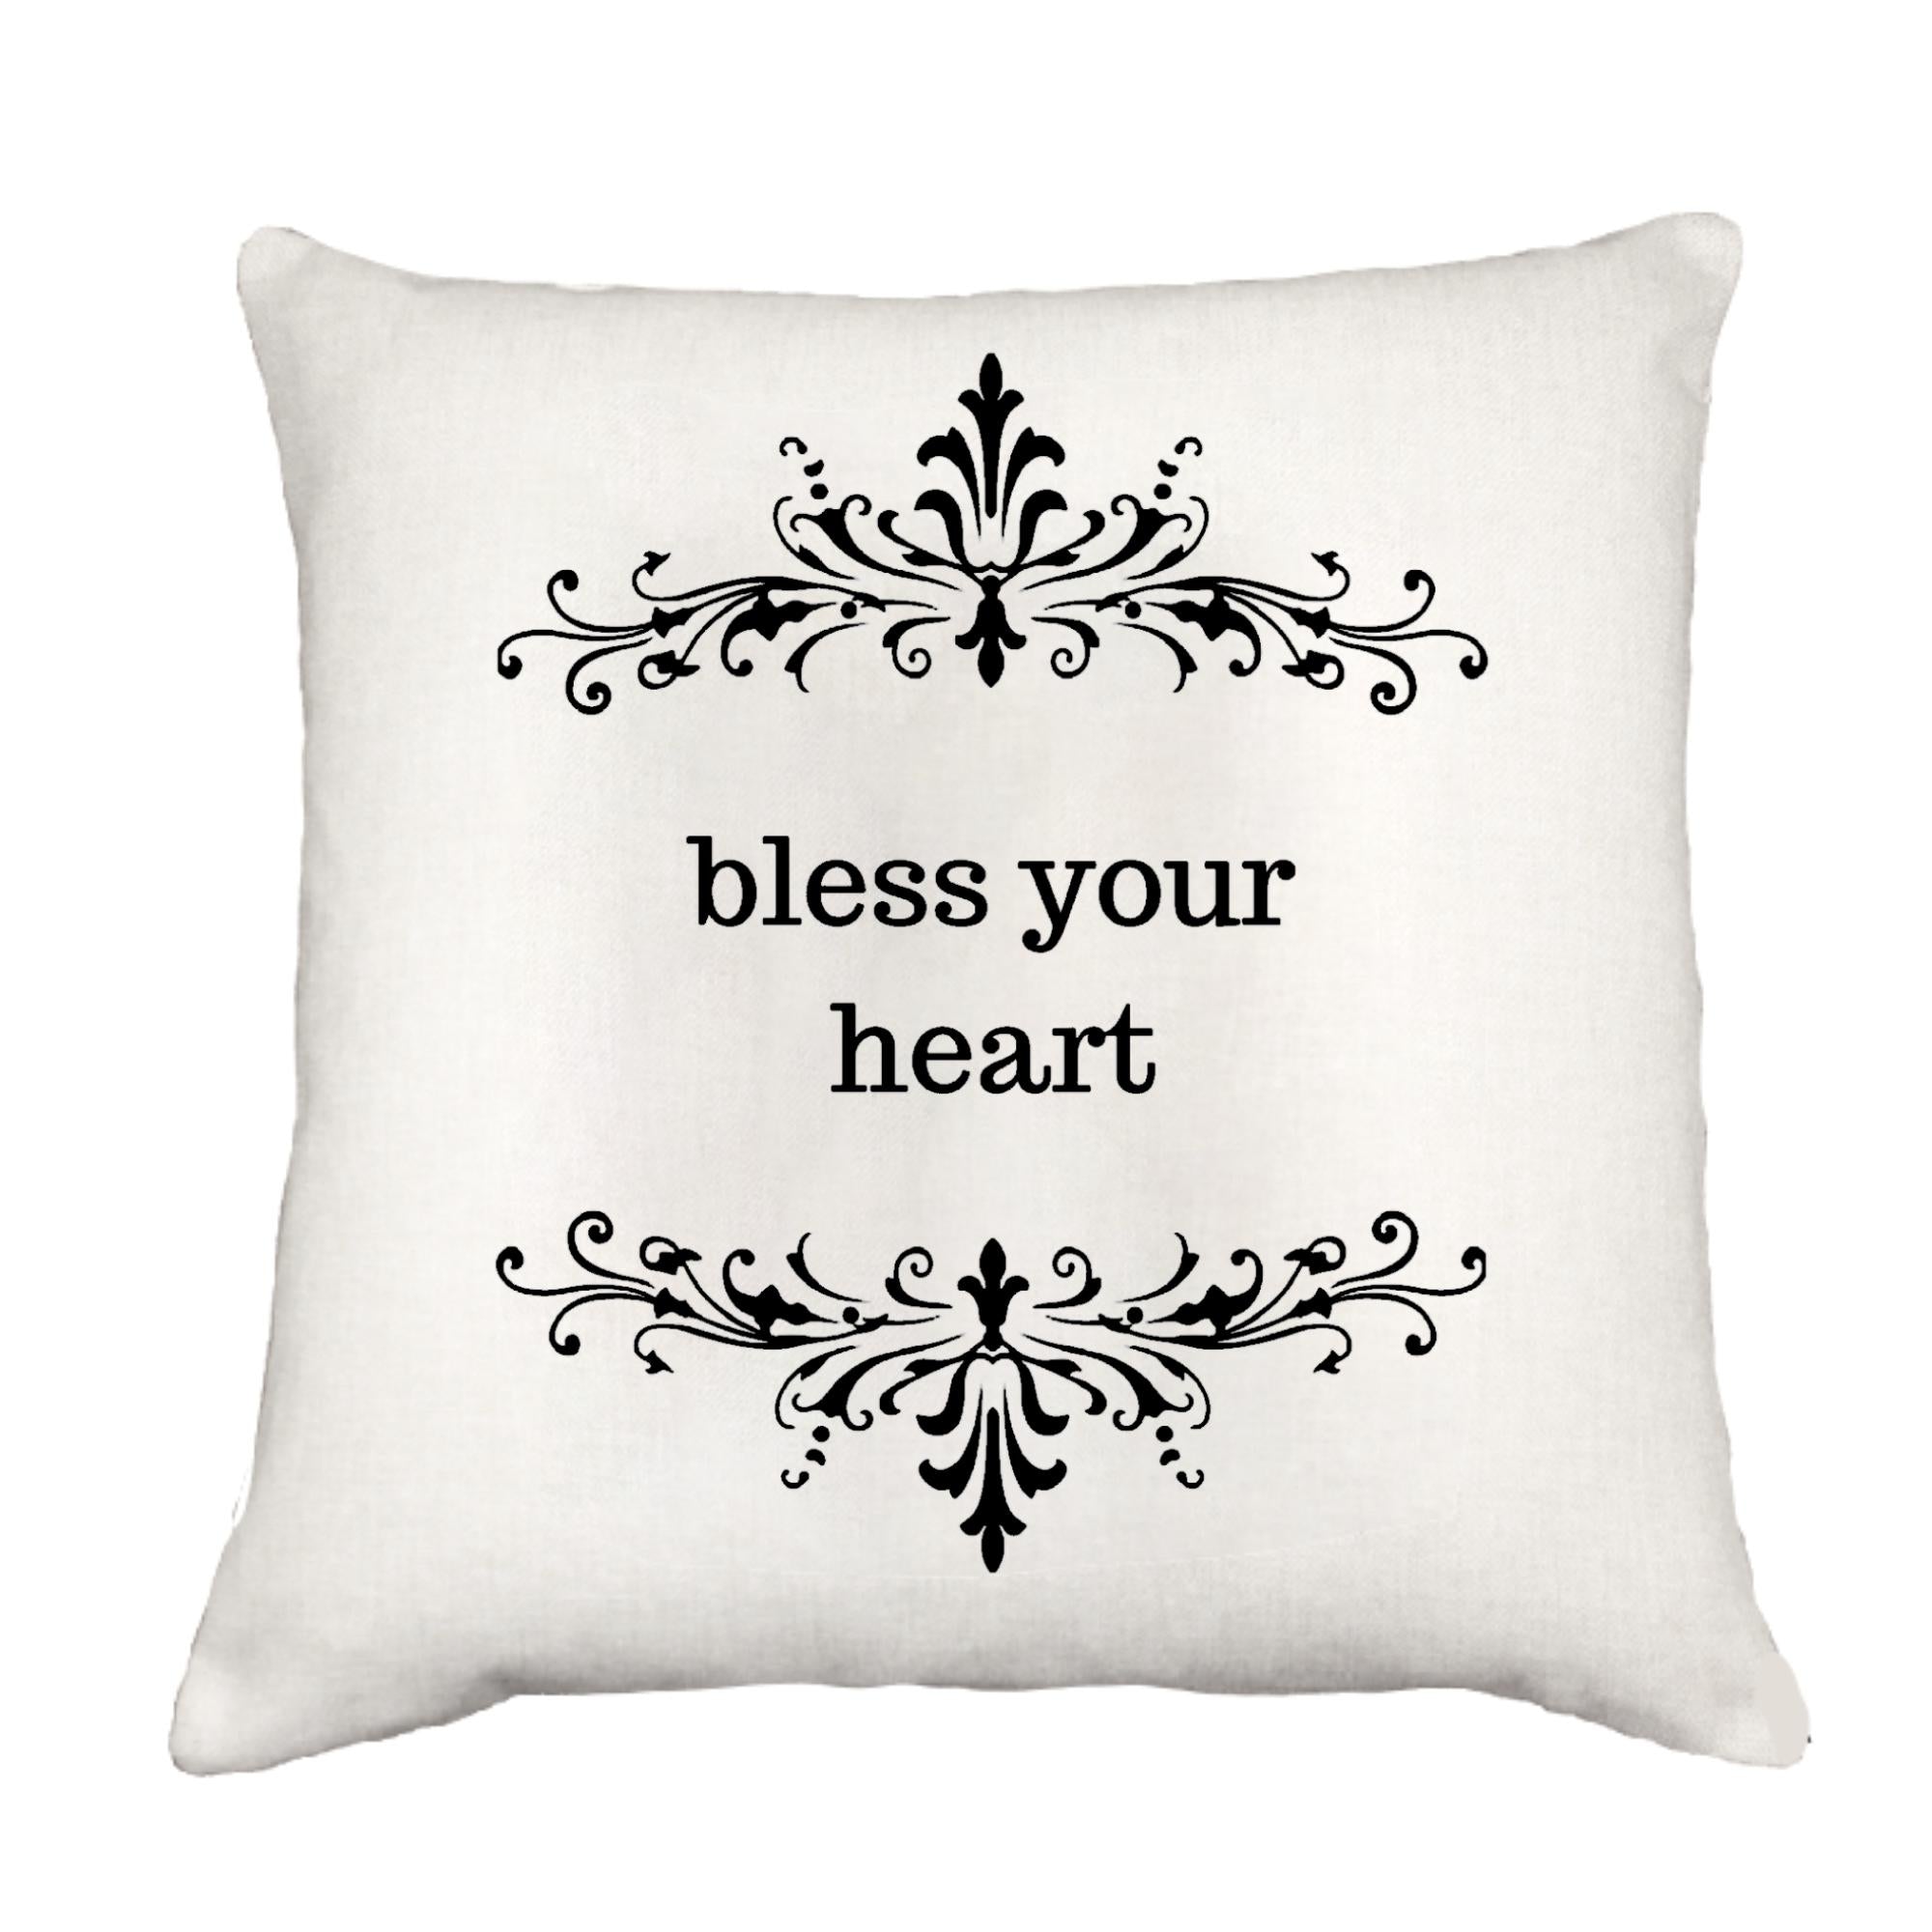 Bless Your Heart Cottage Pillow Throw/Decorative Pillow - Southern Sisters